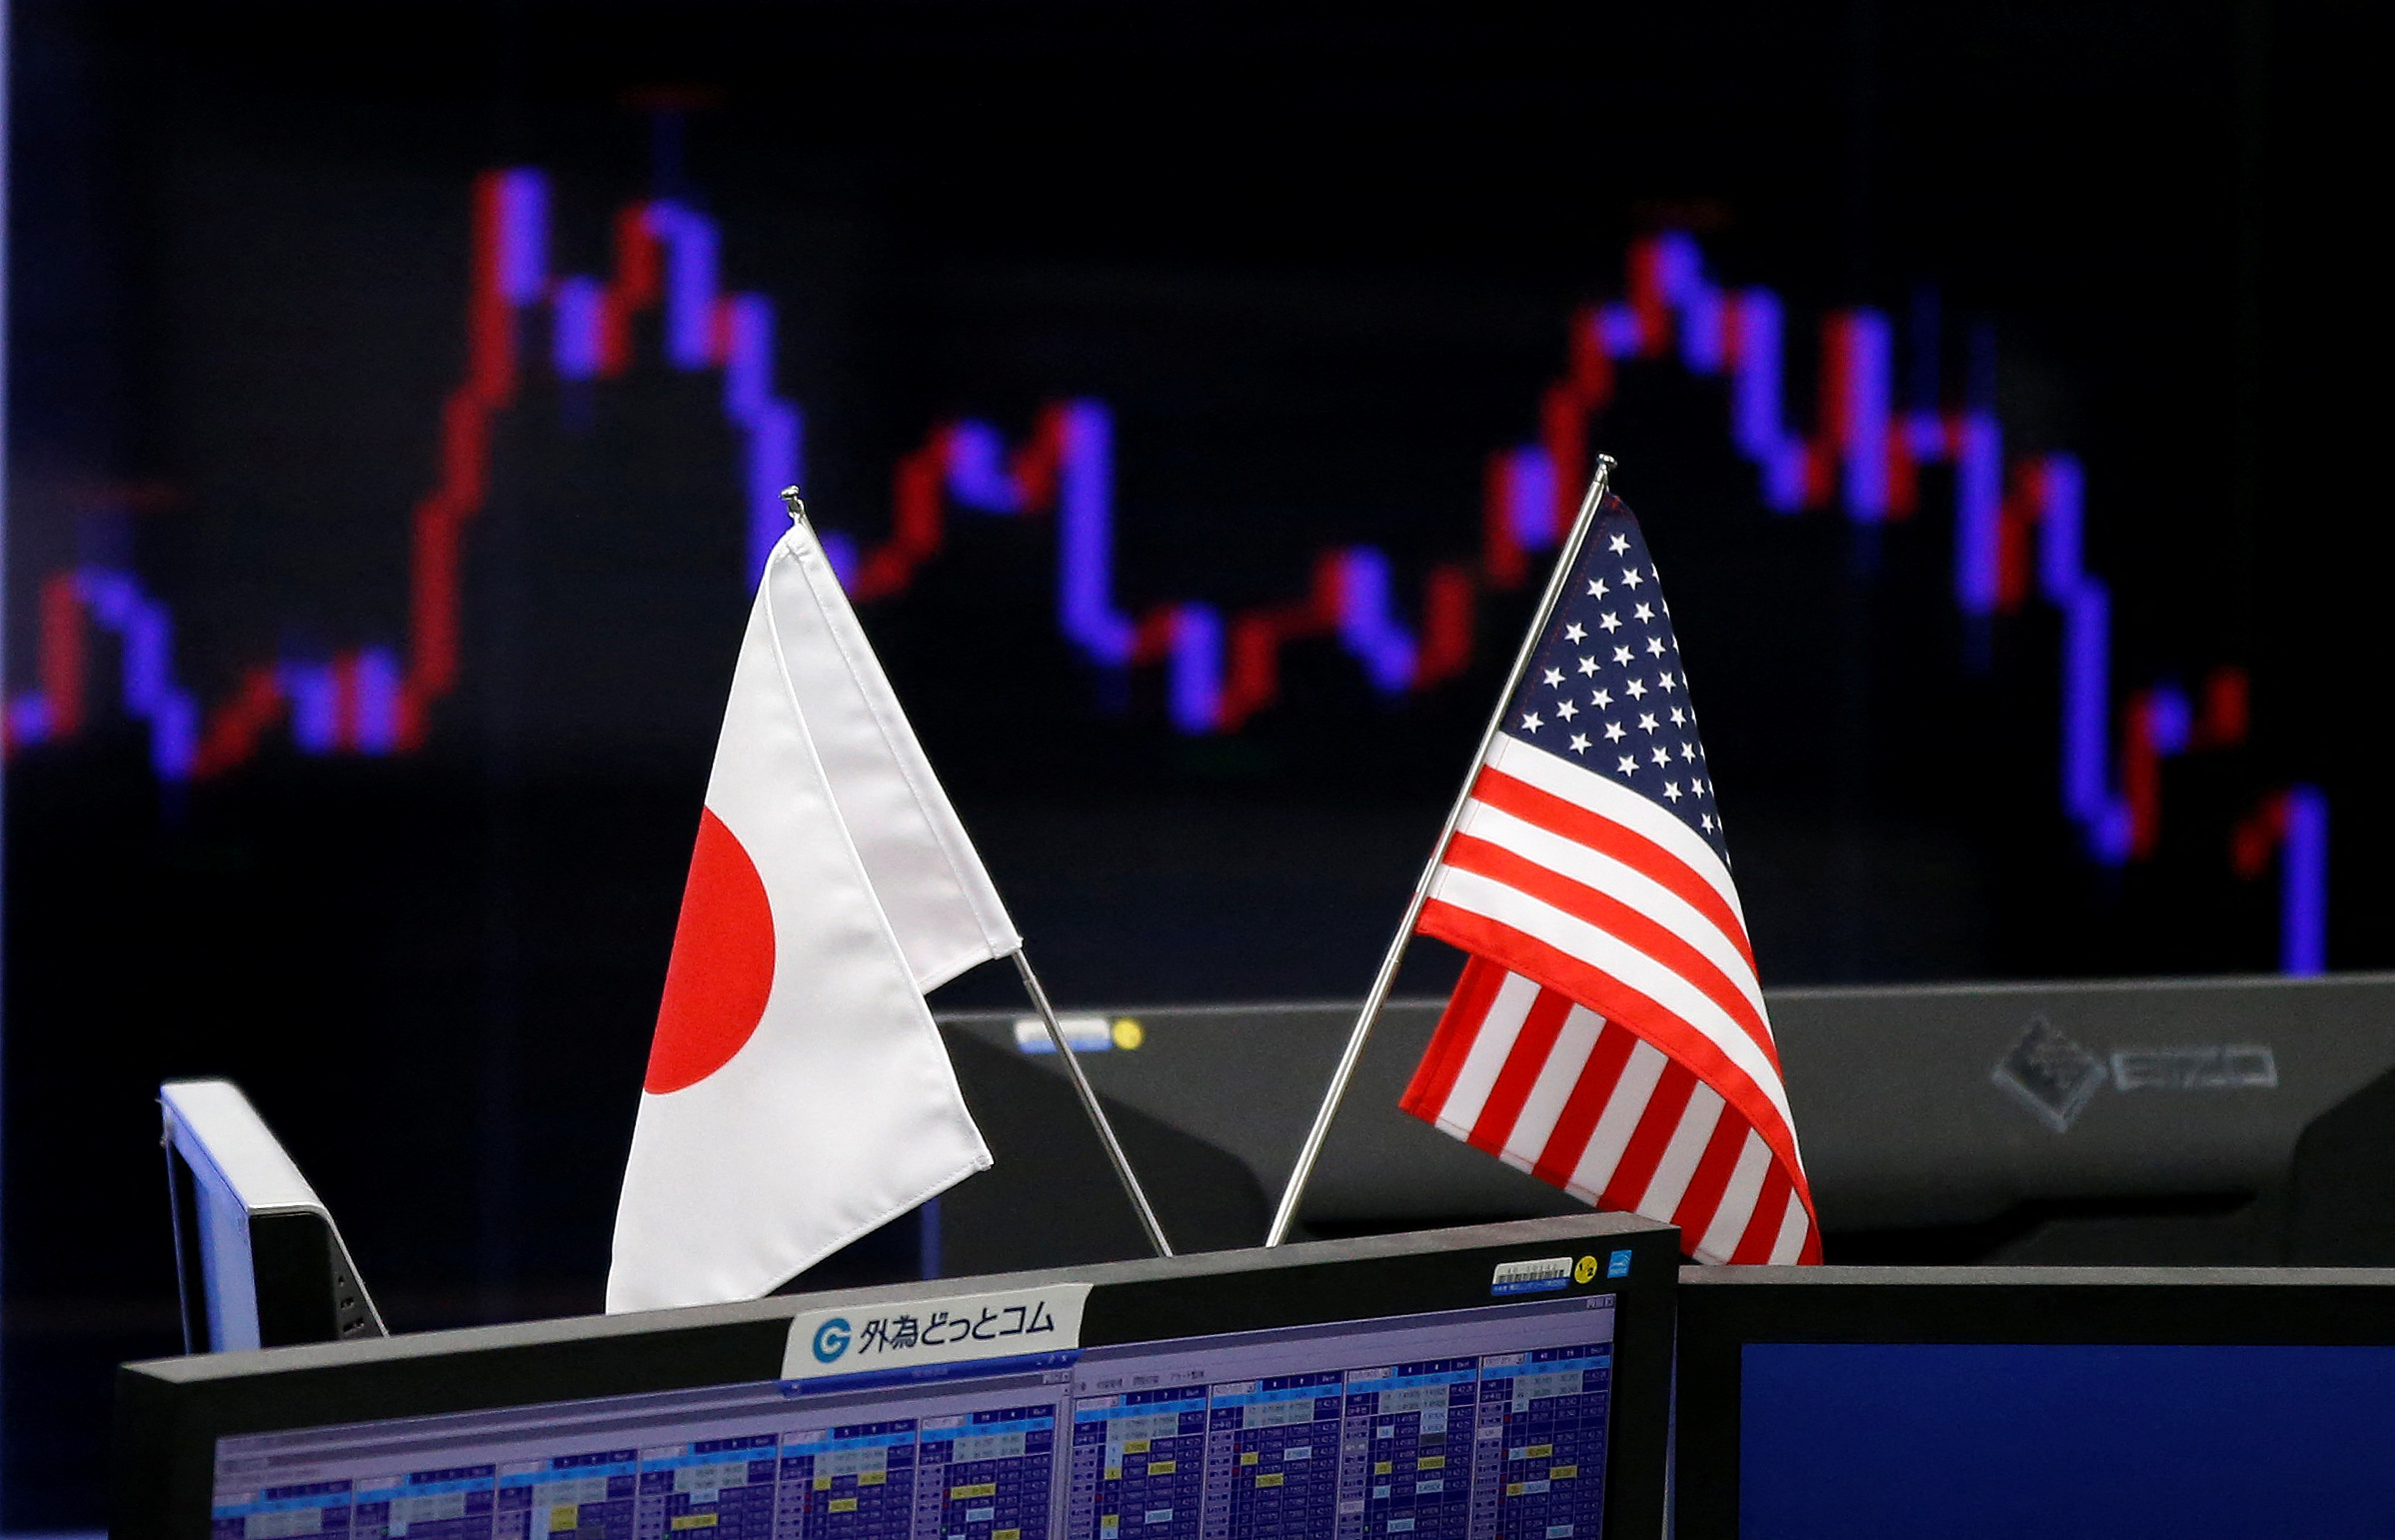 National flags of Japan and the U.S. are seen in front of a monitor showing a graph of the Japanese yen's exchange rate against the U.S. dollar at a foreign exchange trading company in Tokyo